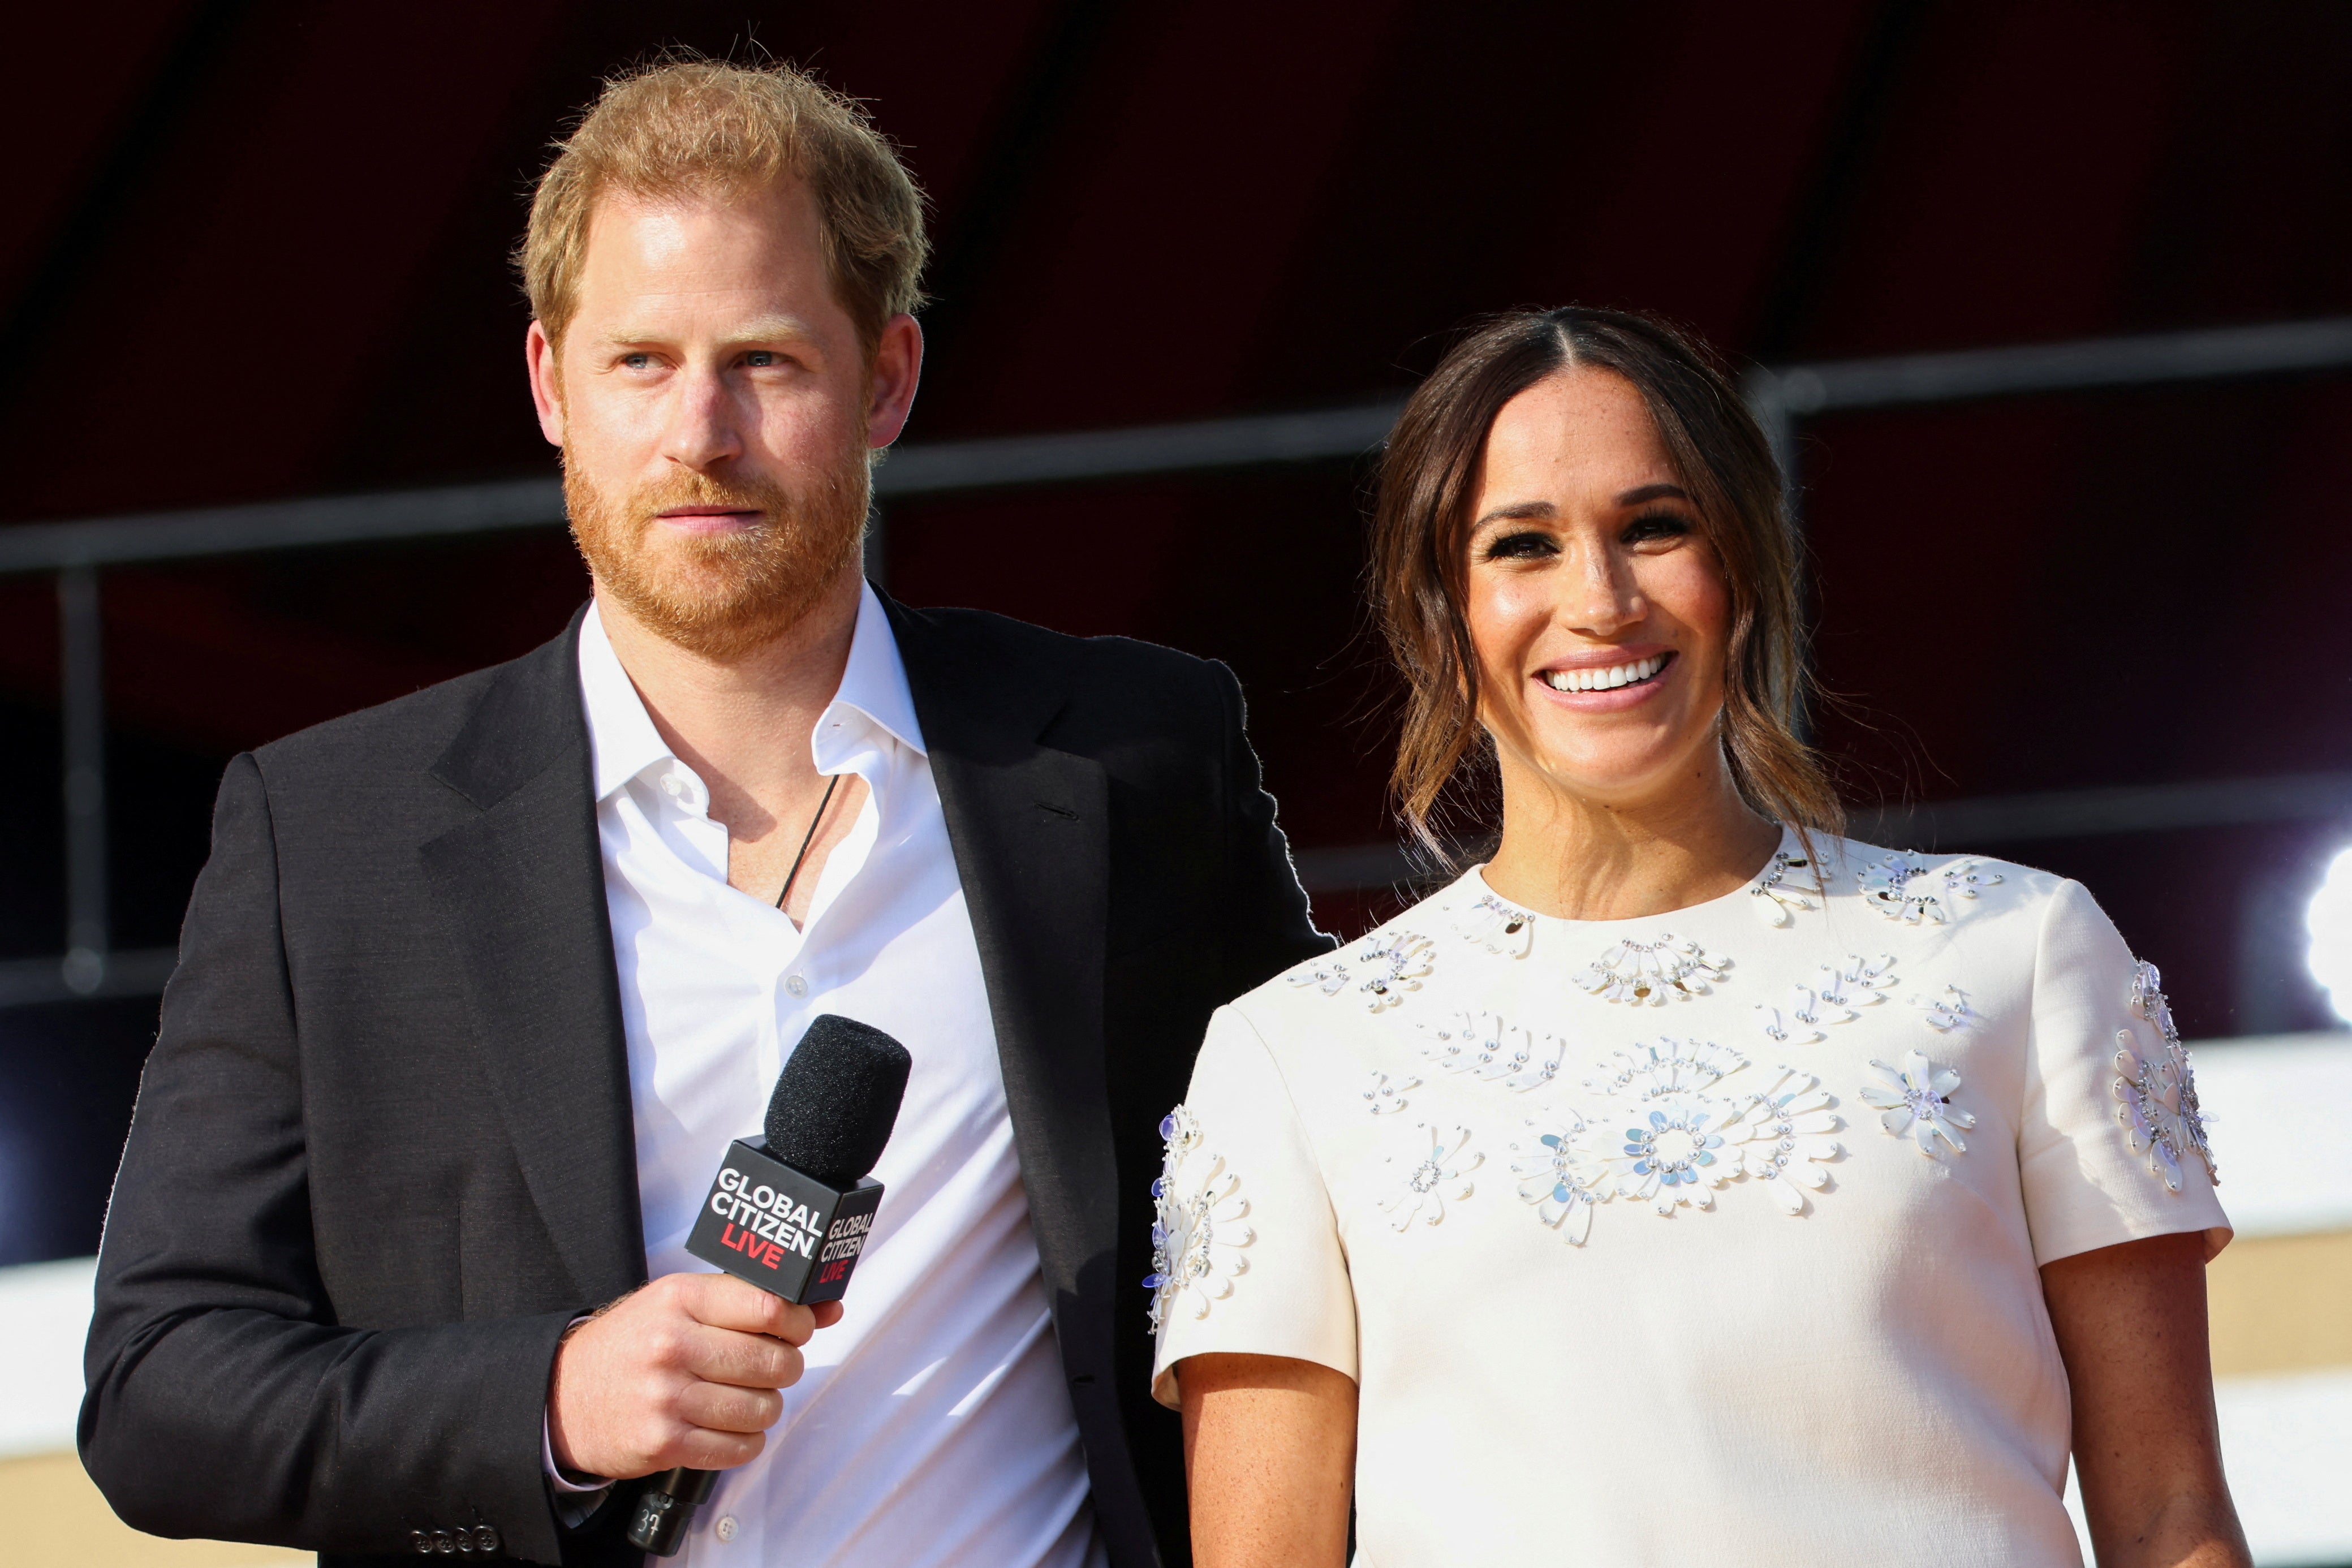 The Duke and Duchess of Sussex stepped down from their royal duties in January 2020